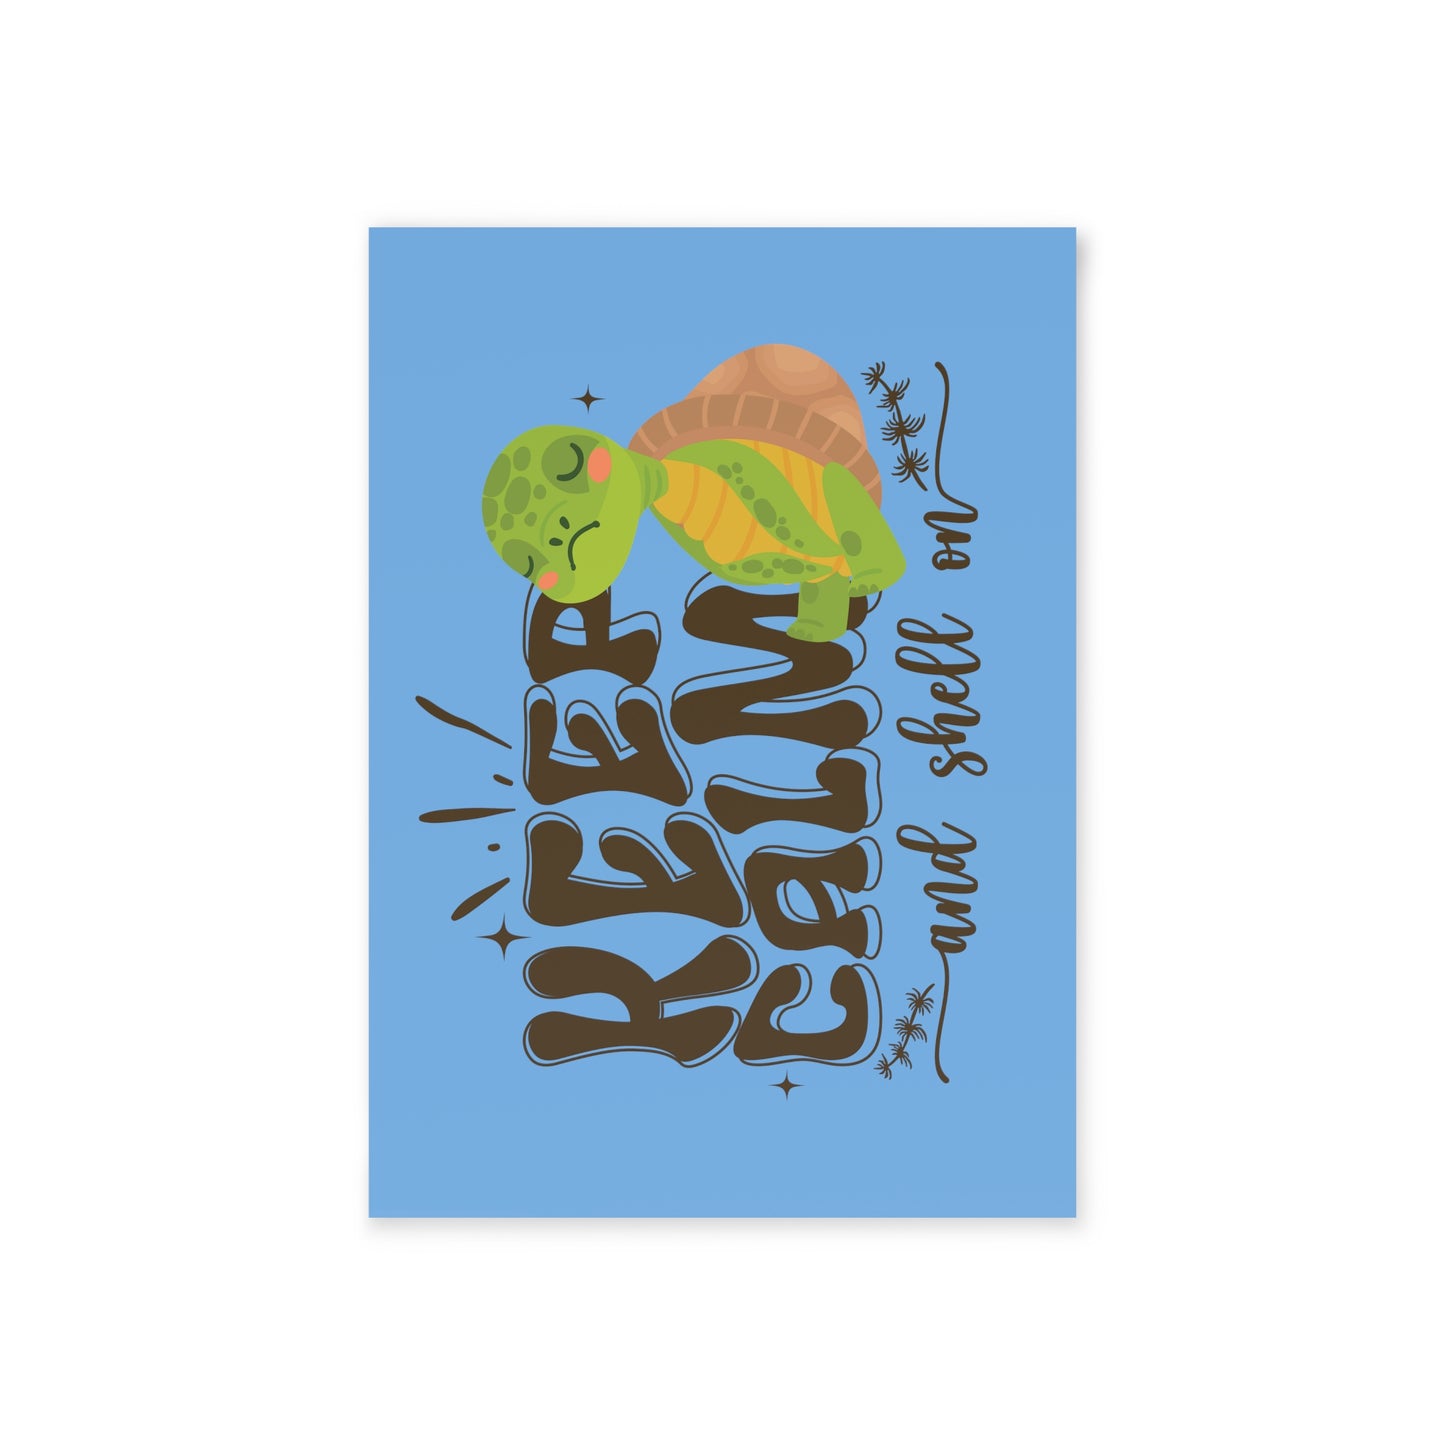 Holiday Cards (Two-sided print) - Keep Calm and Shell On